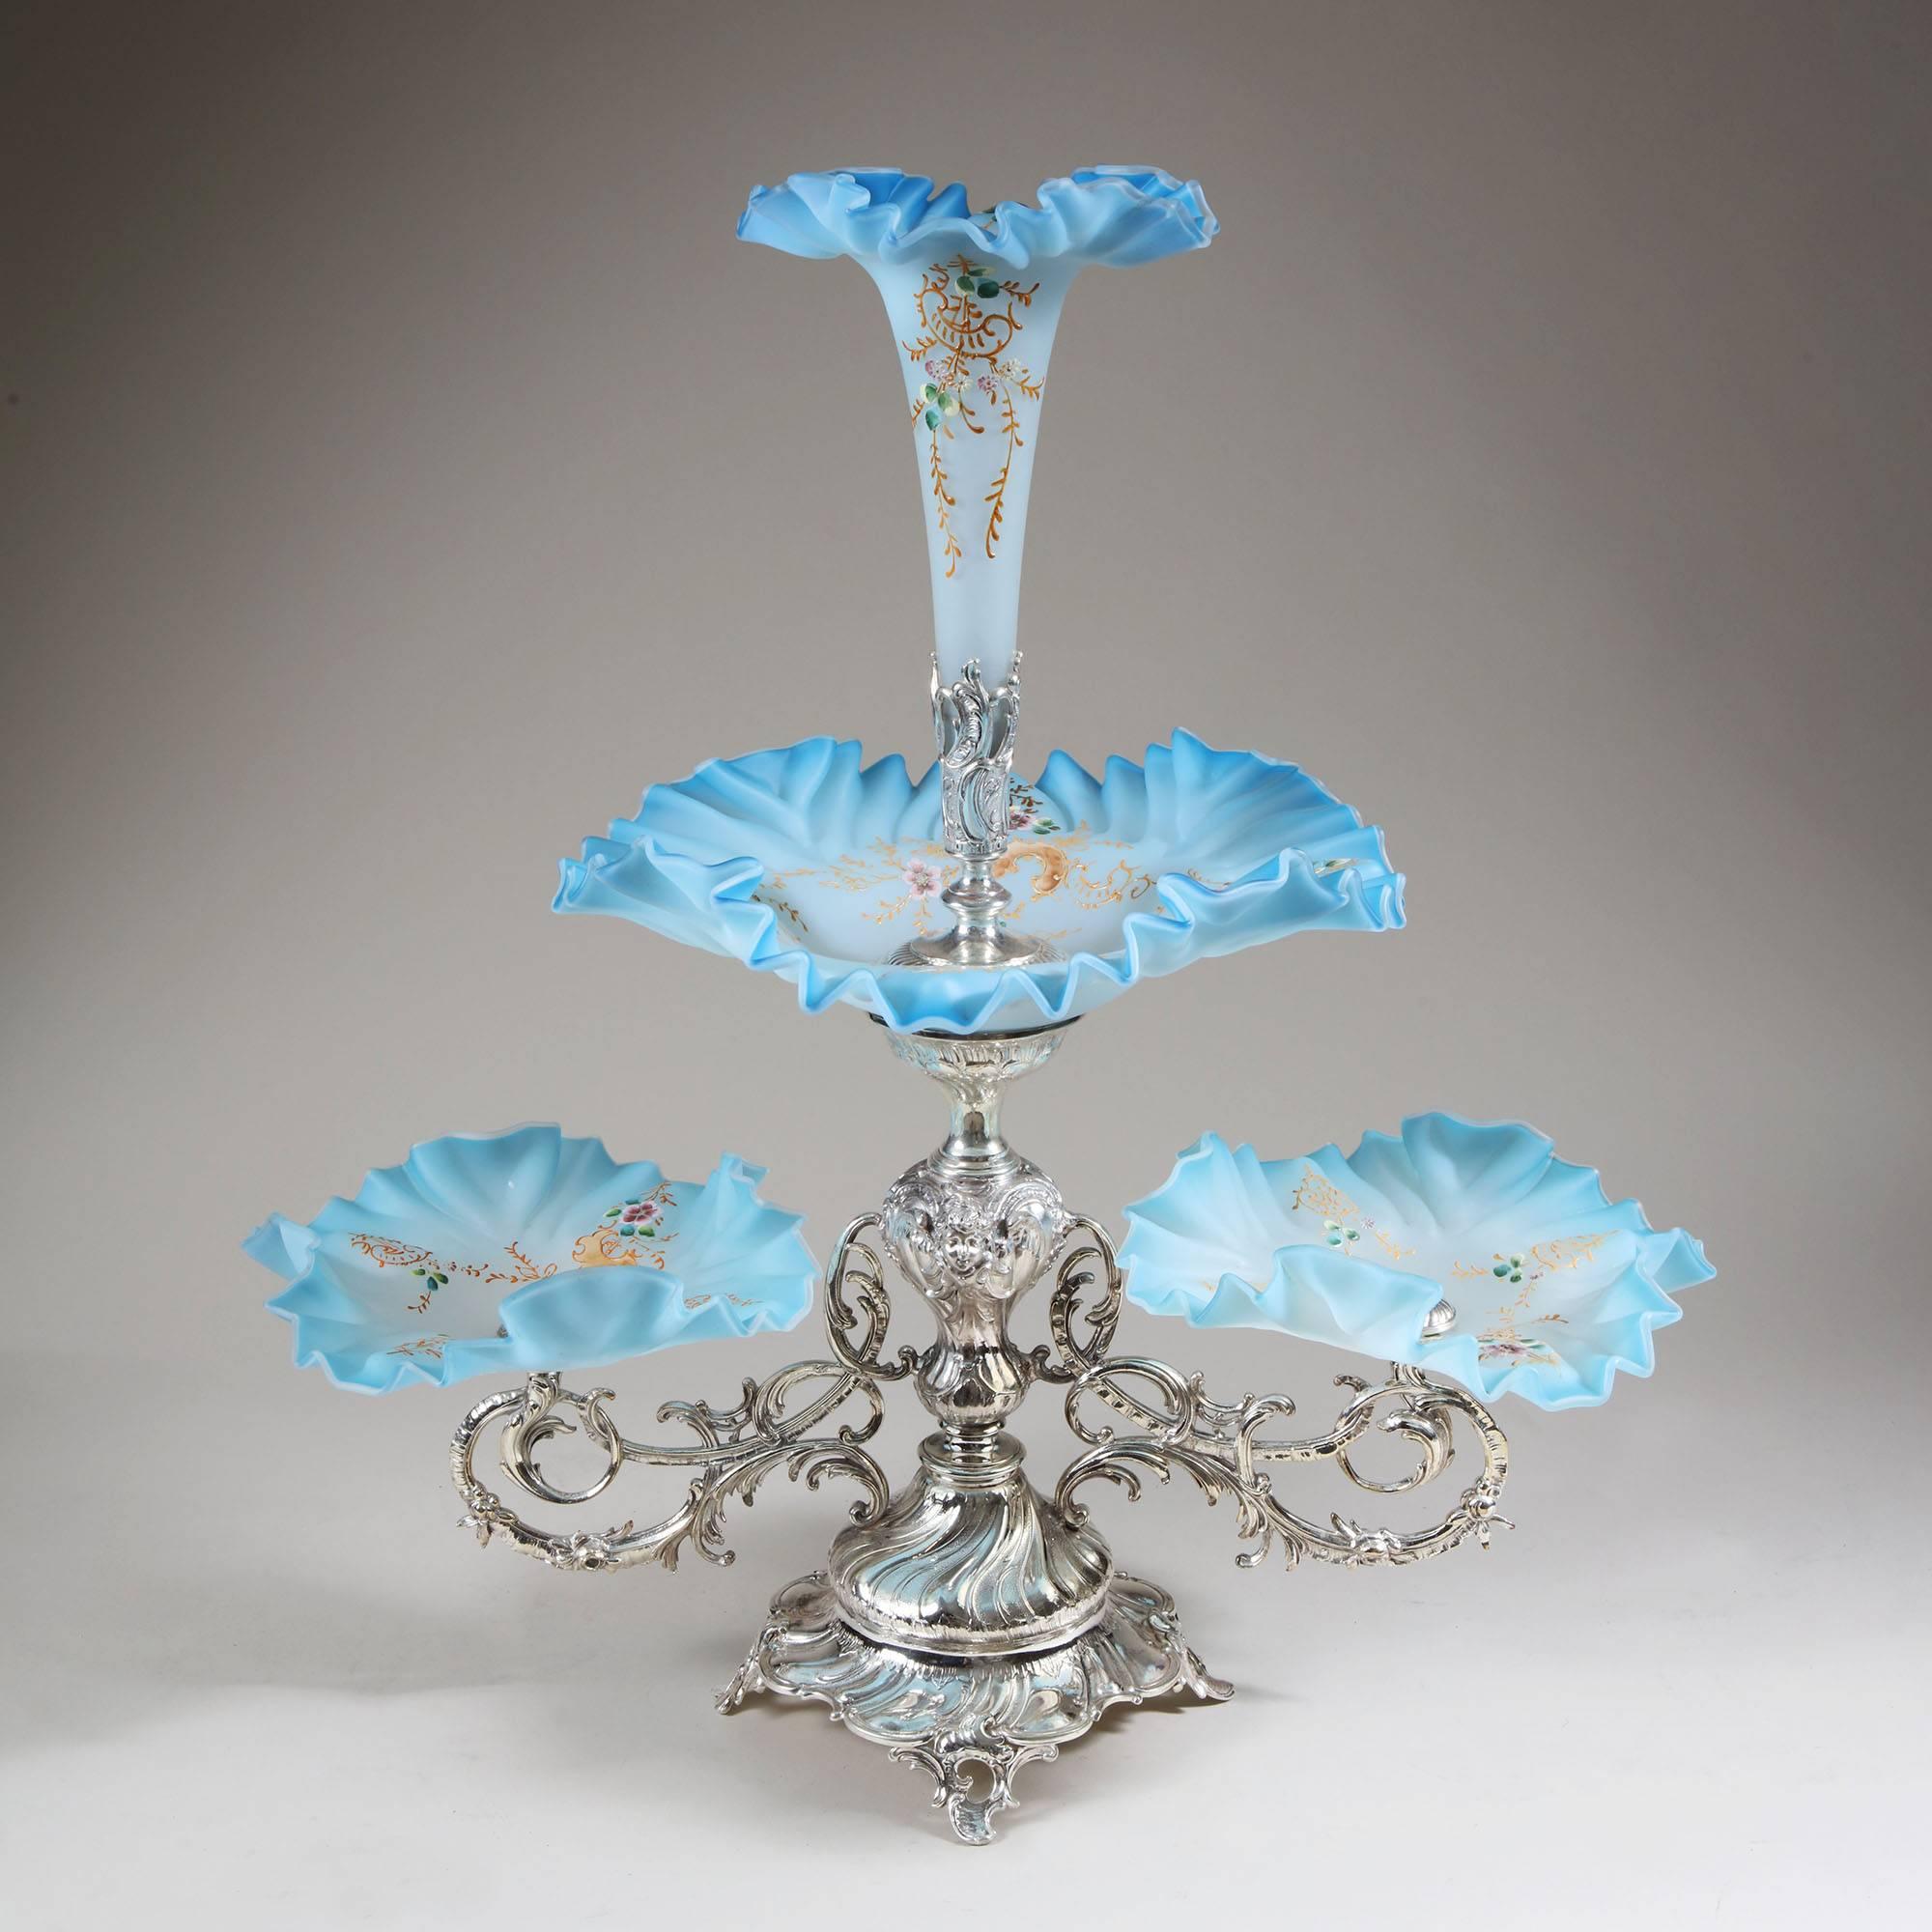 A silver plate and glass centrepiece
Rubbed stamp
France, circa 1900 

Measure: 60cm high, 
56 cm wide, 
33 cm deep.